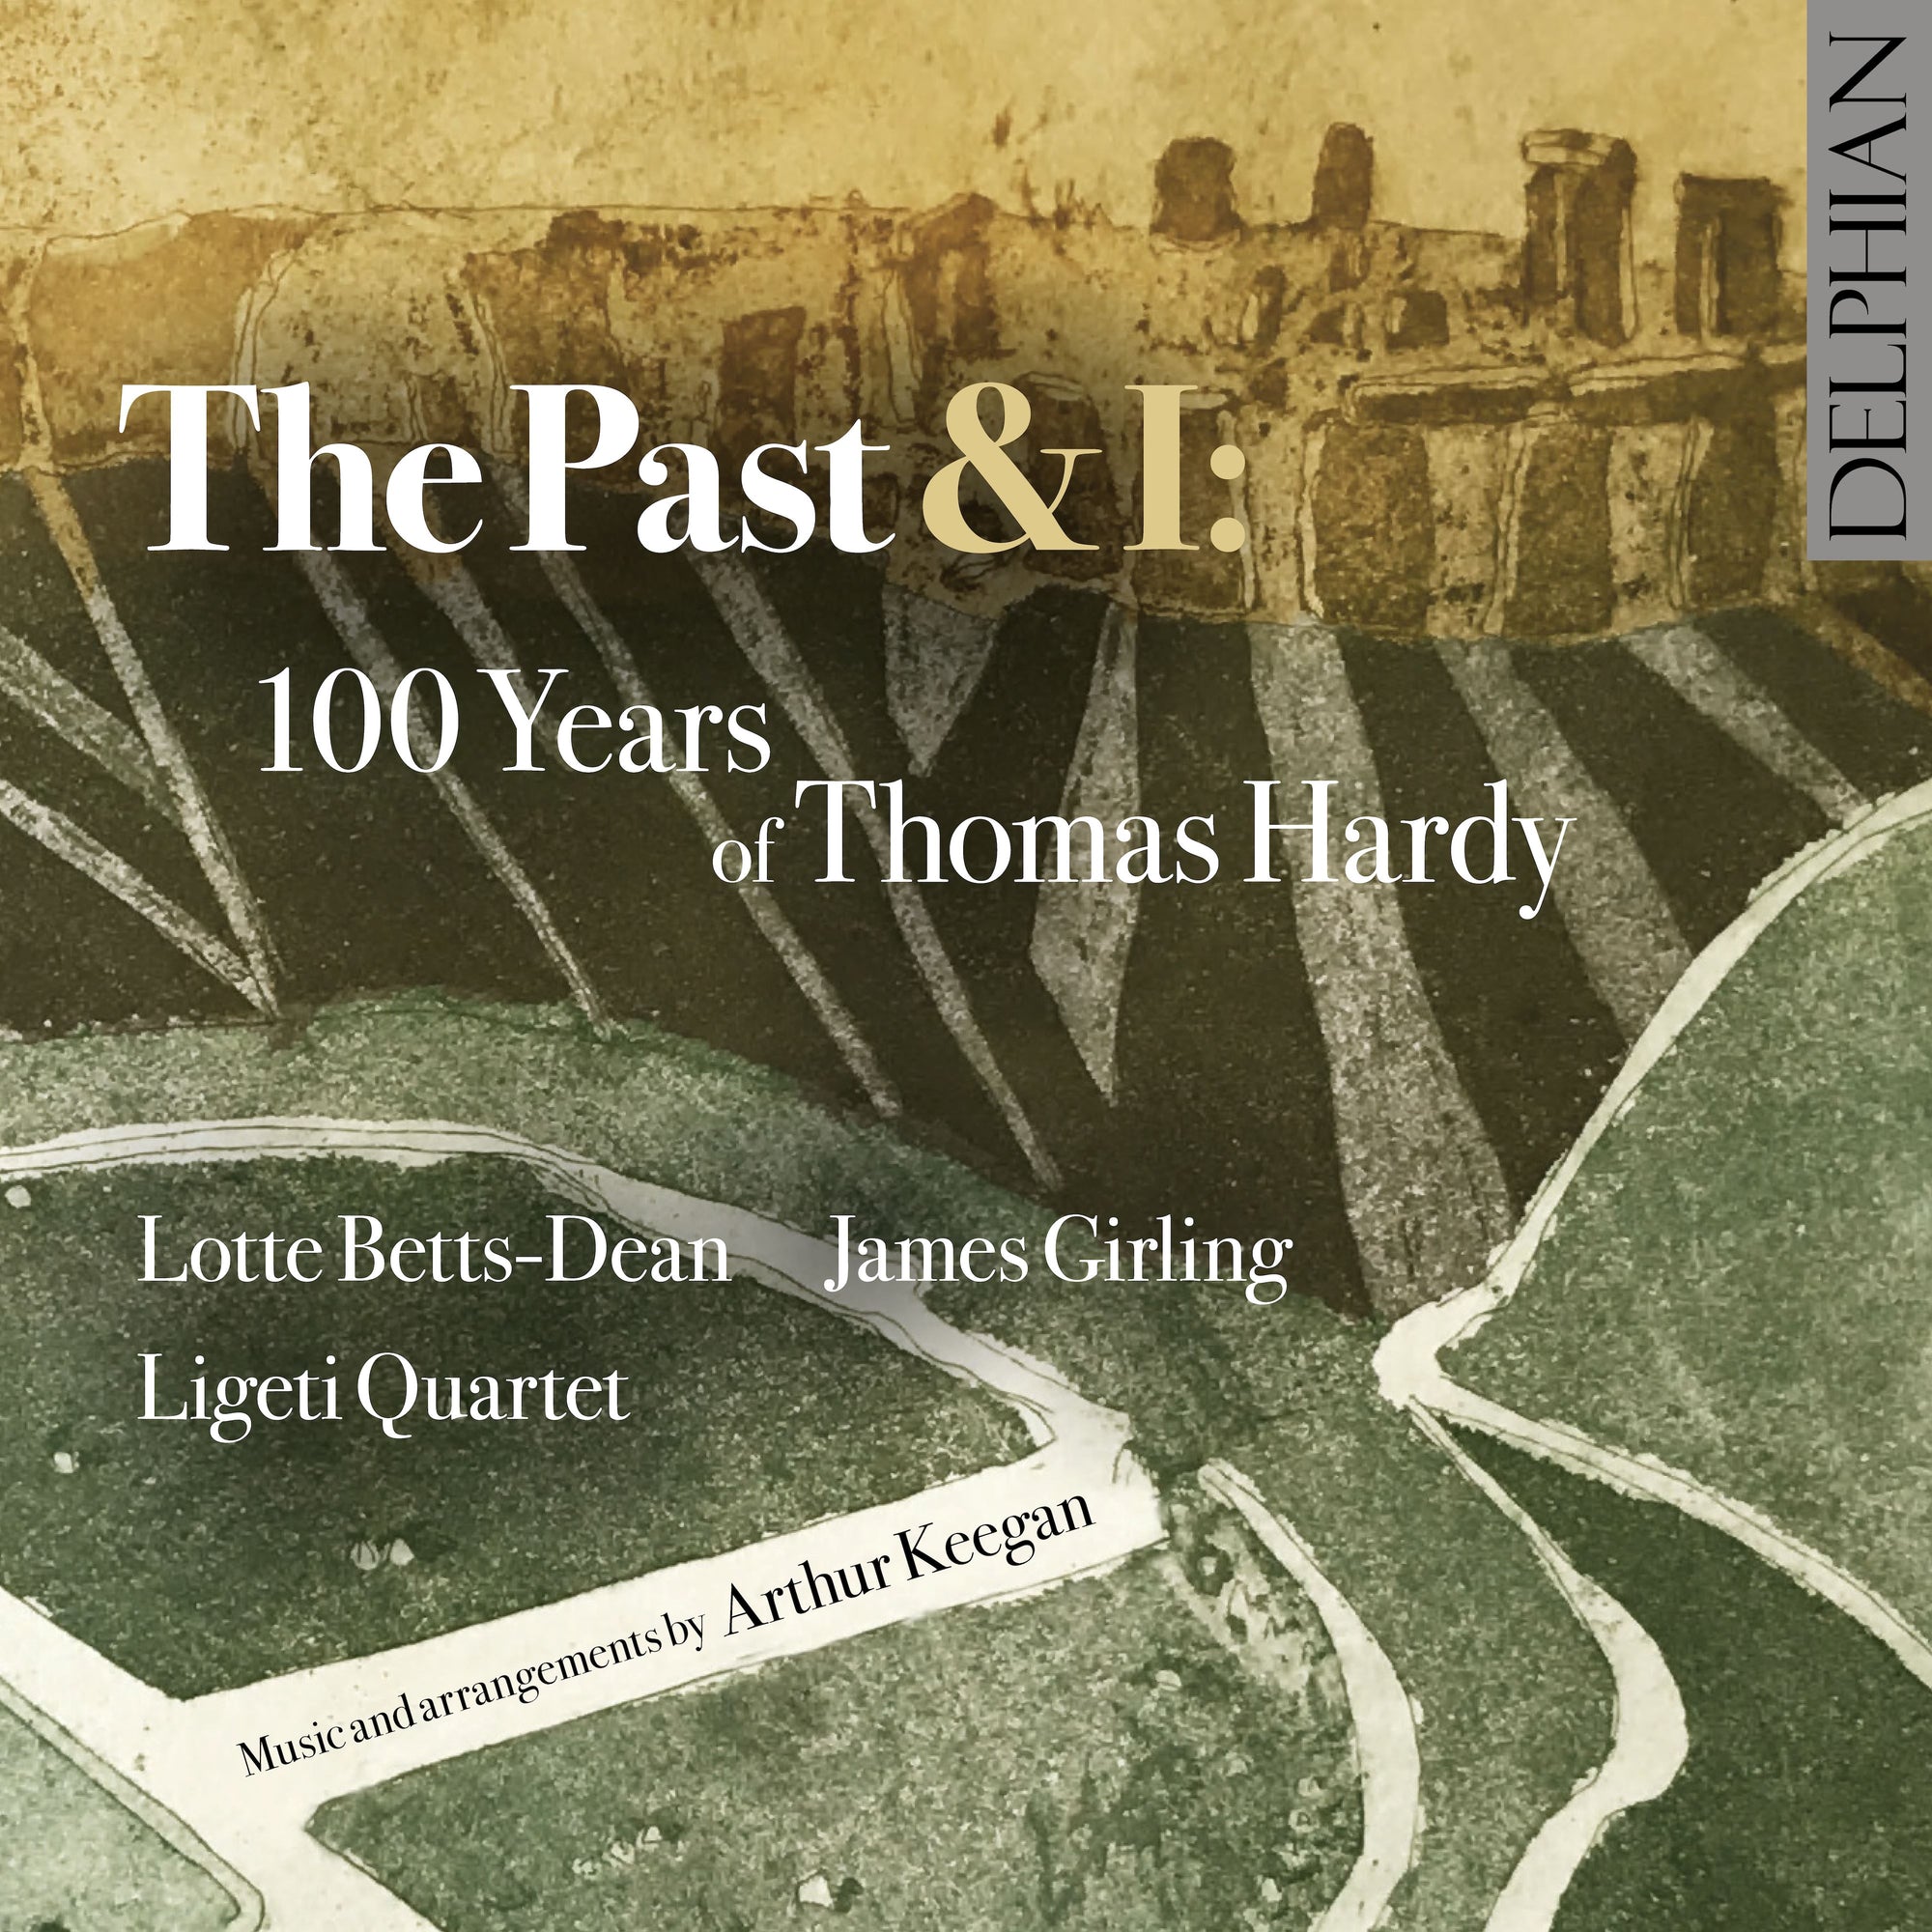 The Past & I: 100 Years of Thomas Hardy